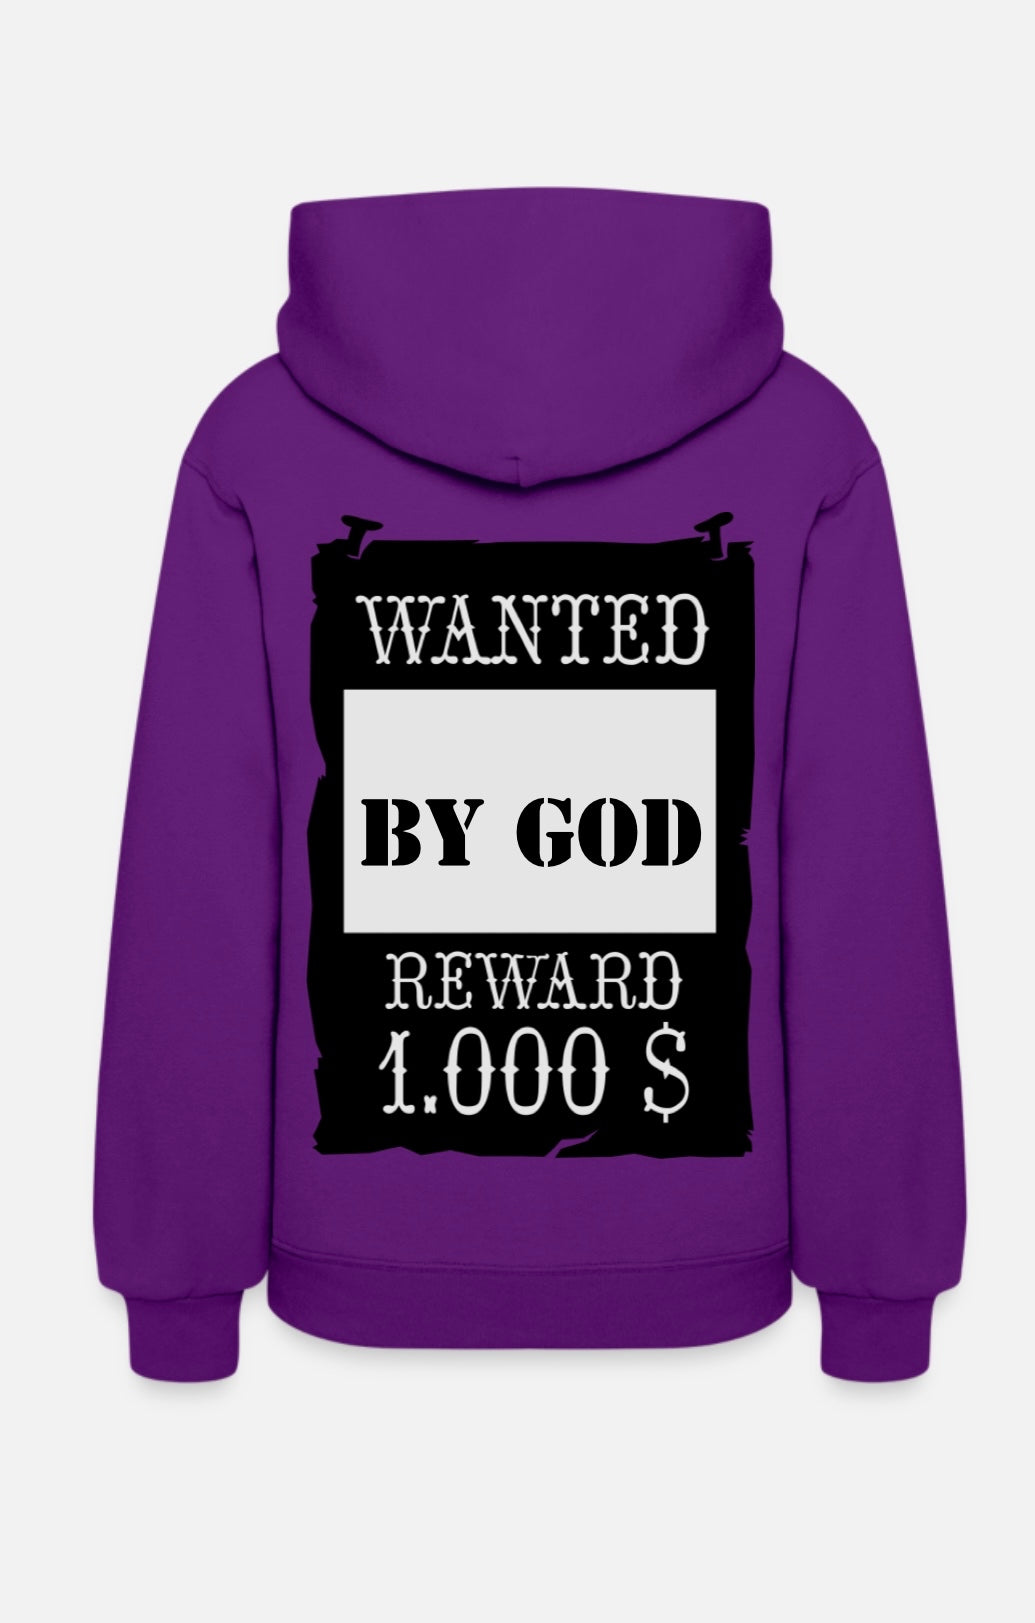 WANTED BY God